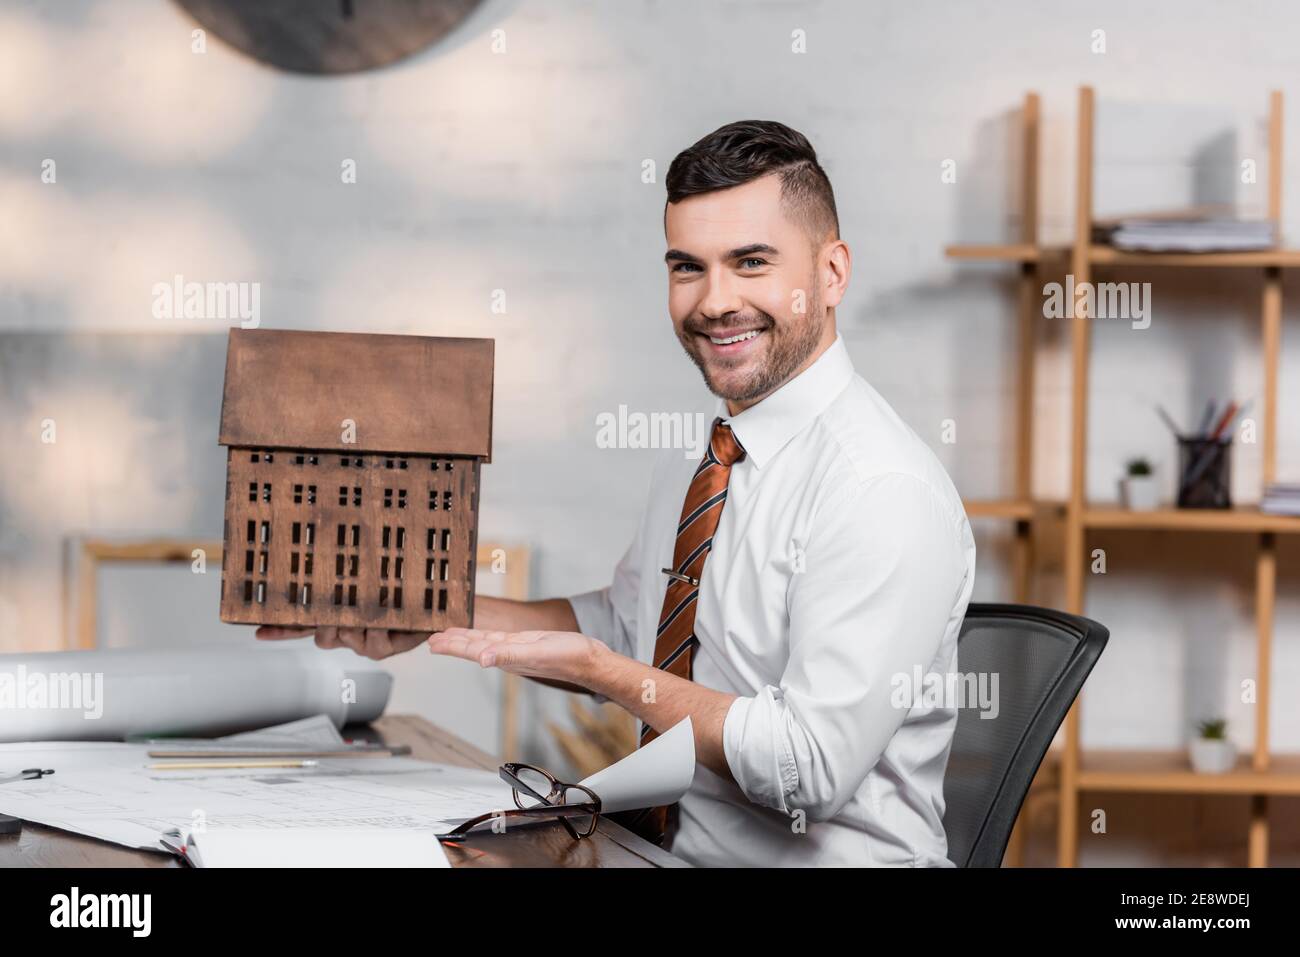 happy architect smiling at camera while pointing at house model at workplace Stock Photo